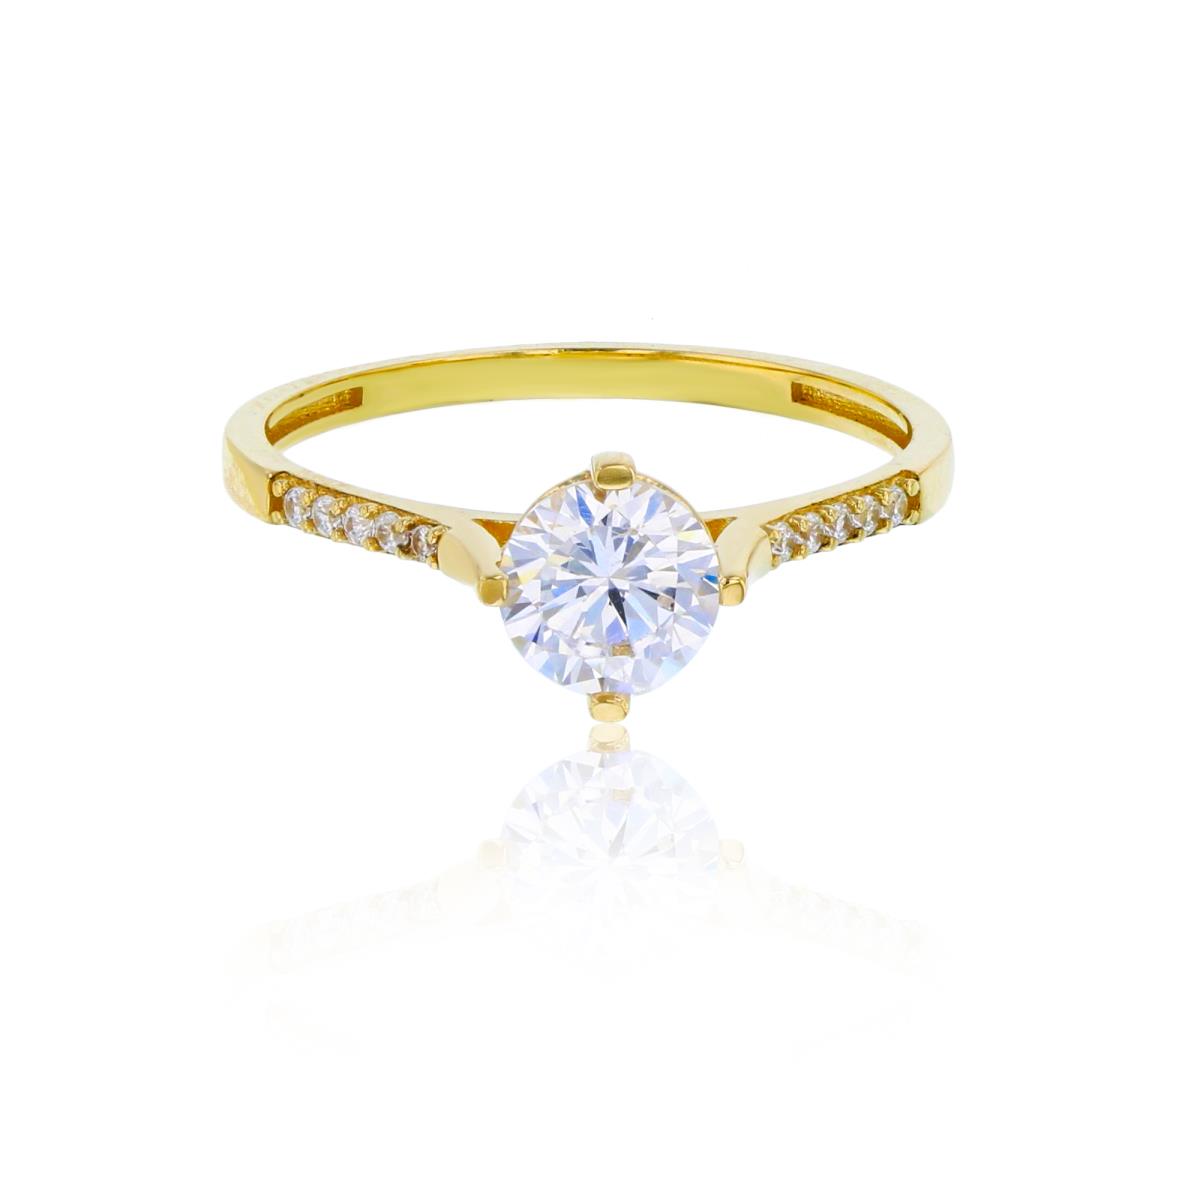 10K Yellow Gold 5.75mm Round Cut CZ Thin Engagement Ring